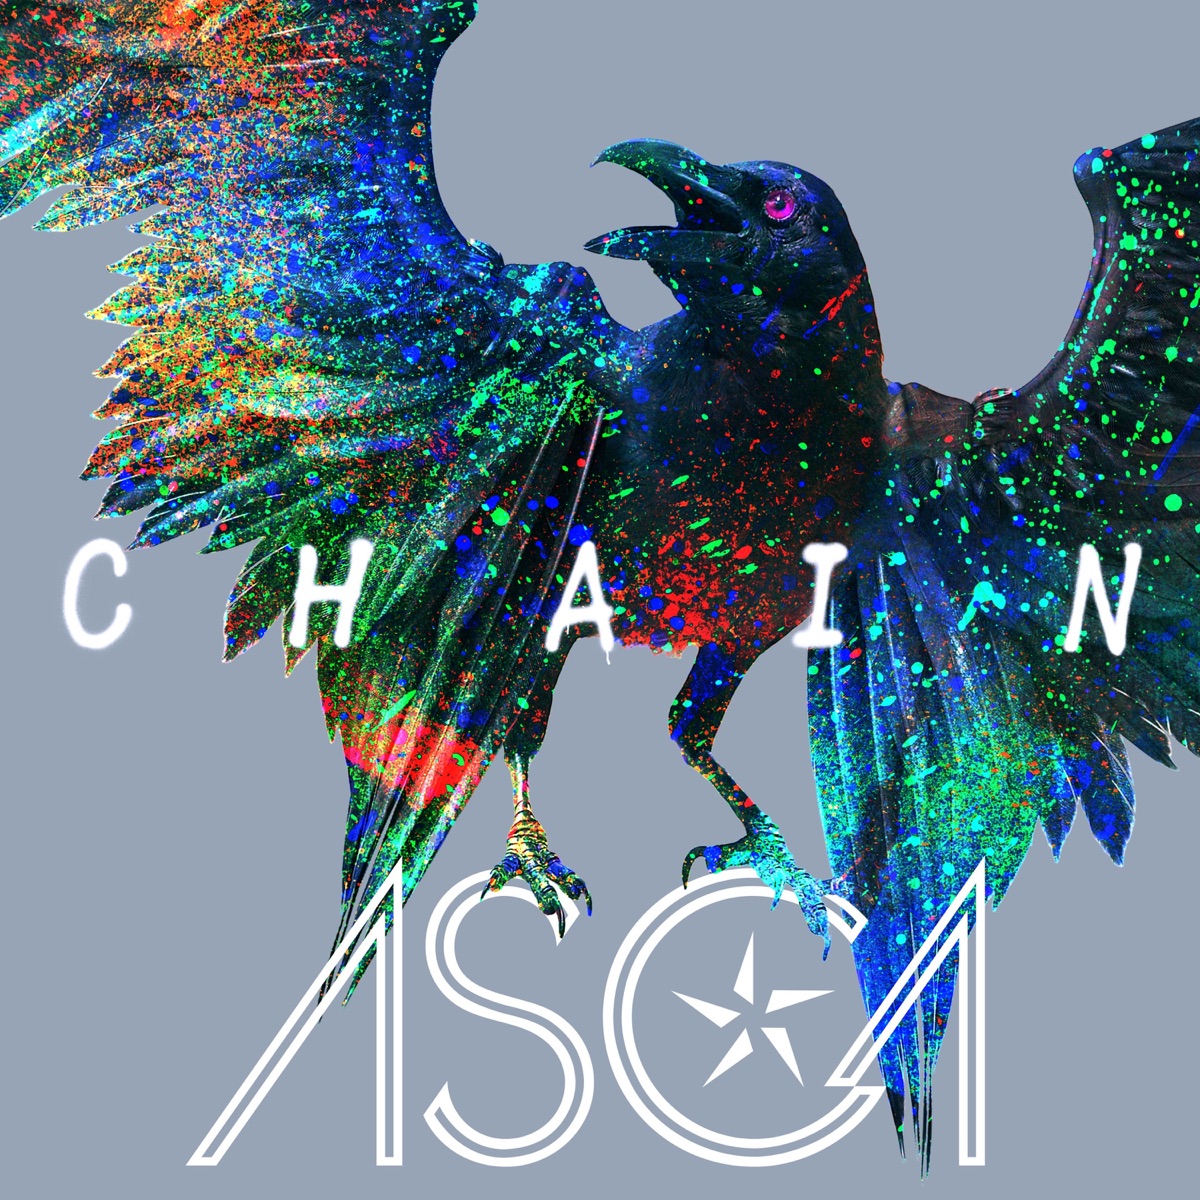 Cover for『ASCA - CHAIN』from the release『CHAIN』